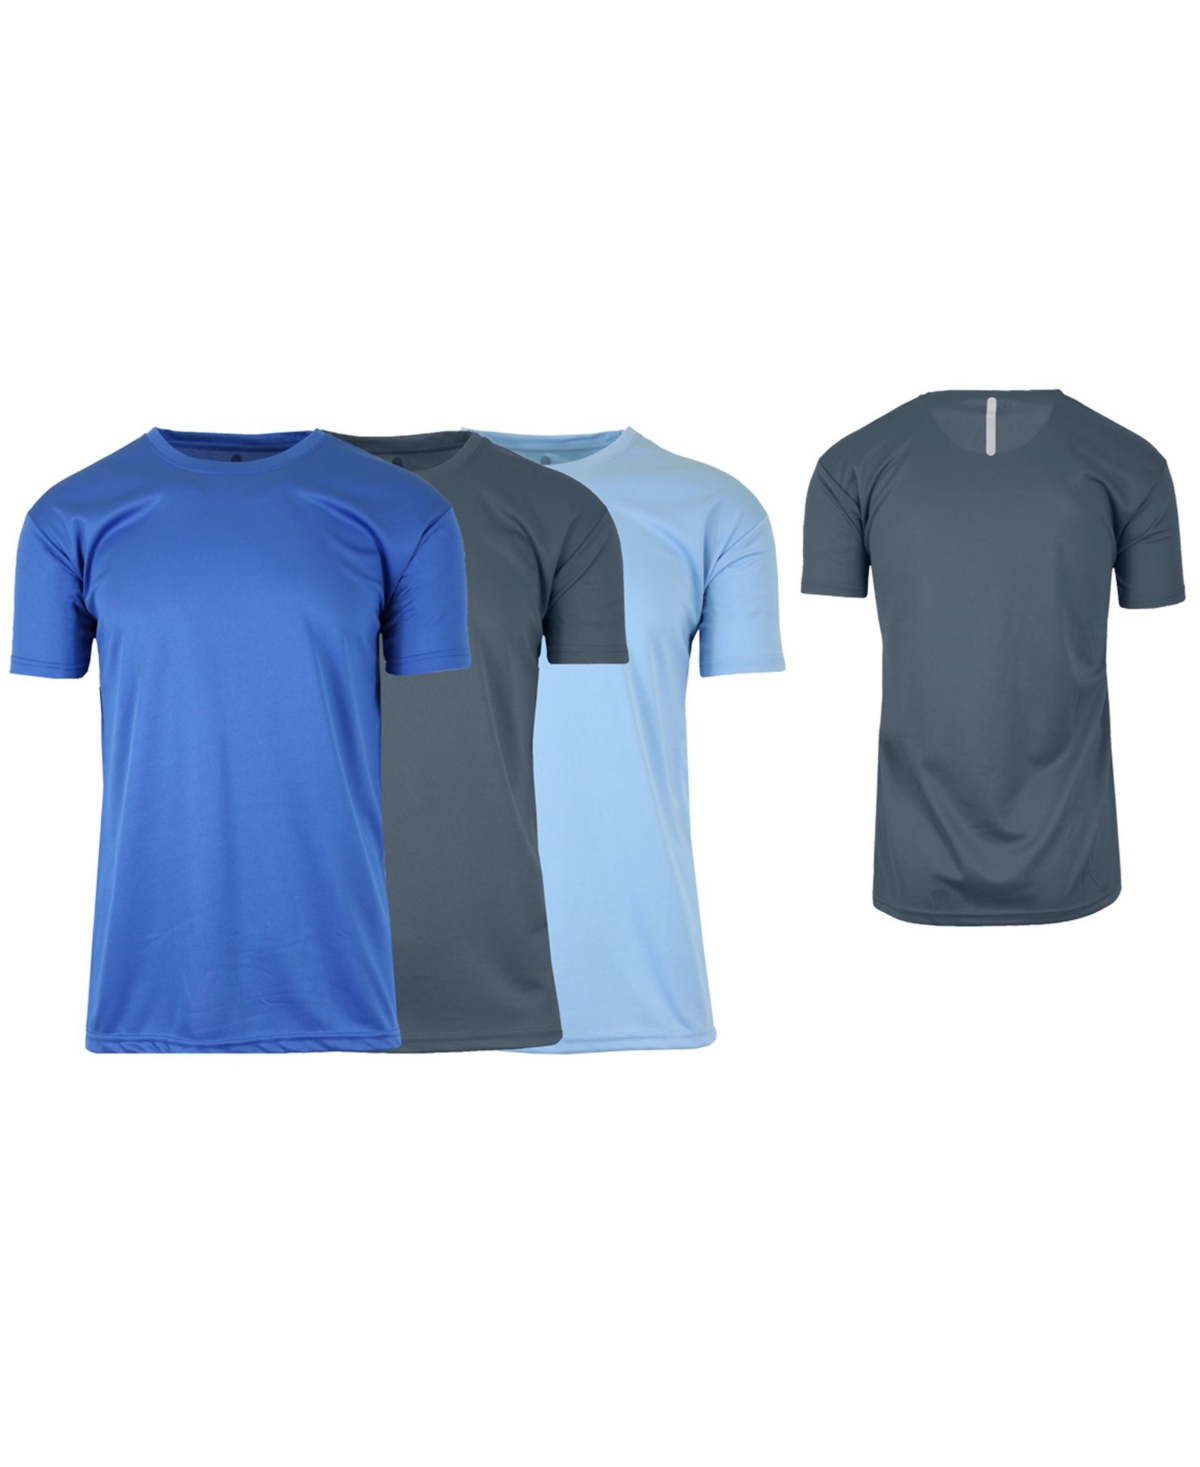 Galaxy By Harvic Men's Short Sleeve Moisture-wicking Quick Dry Performance Tee, Pack Of 3 In Medium Blue,charcoal,light Blue